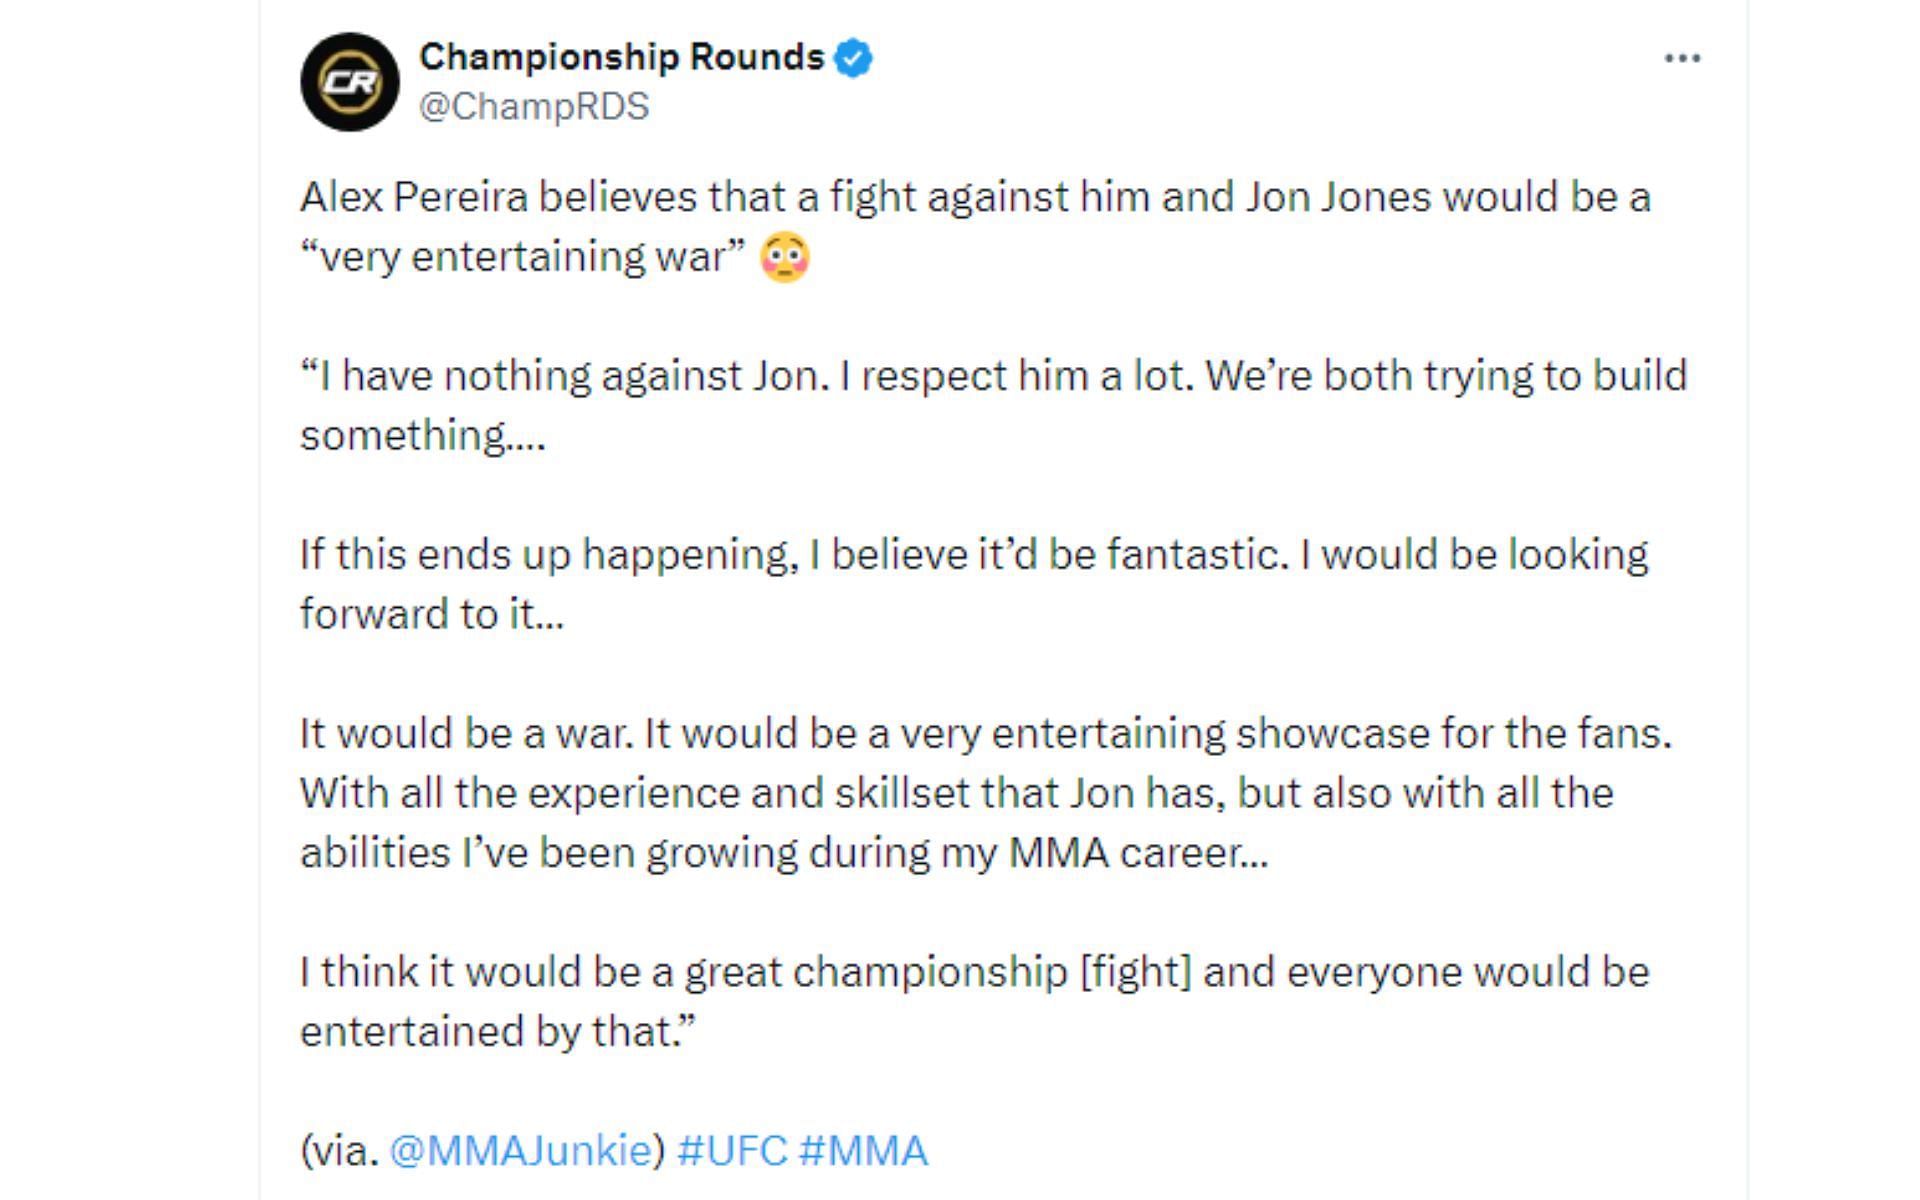 Championship Rounds&#039; tweet regarding Pereira&#039;s comments about potentially fighting Jones [Image courtesy: @ChampRDS - X]